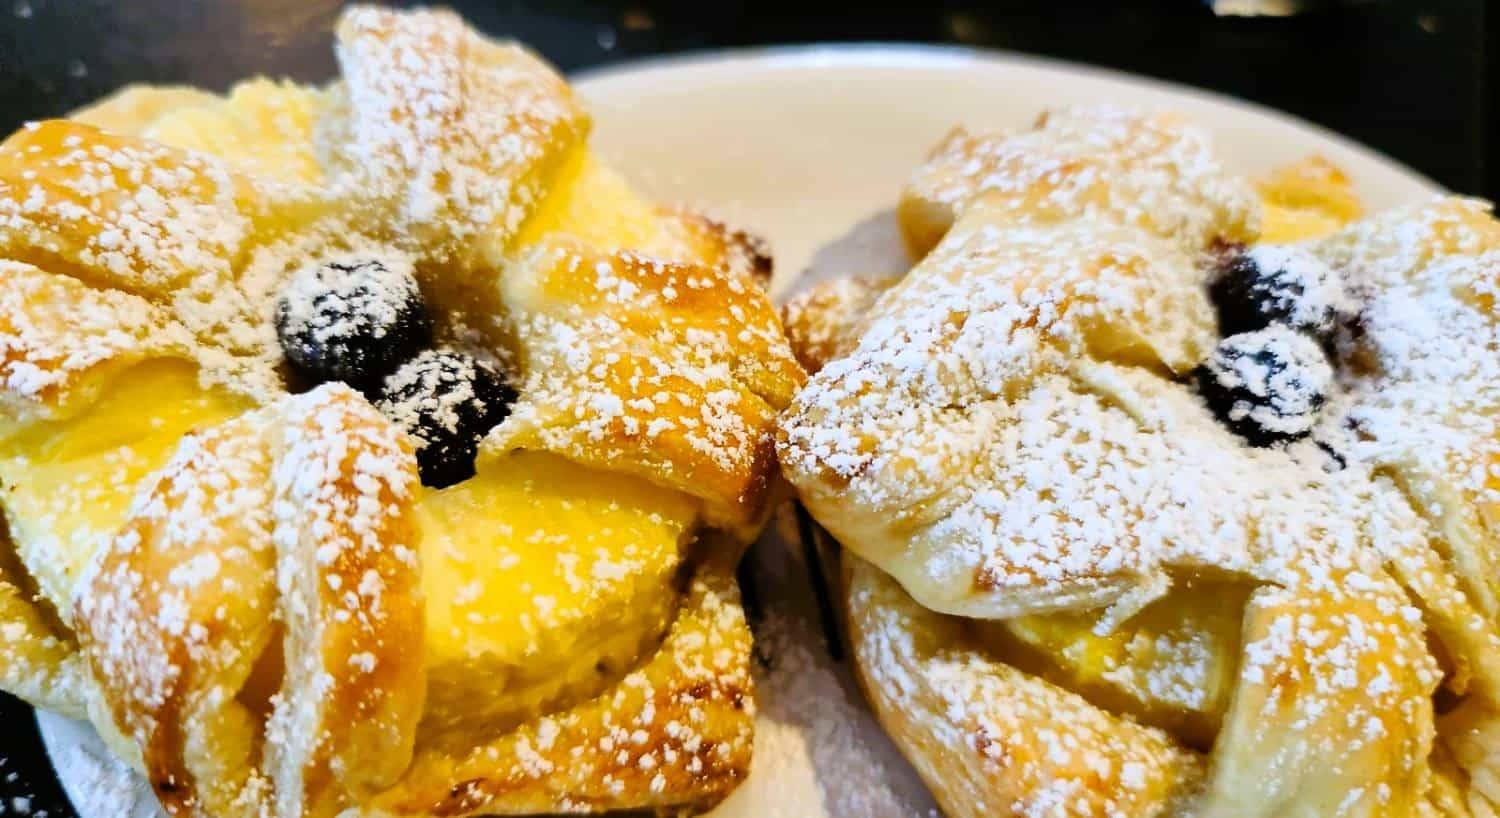 Close up view of pineapple pastries dusted with powdered sugar on a white plate